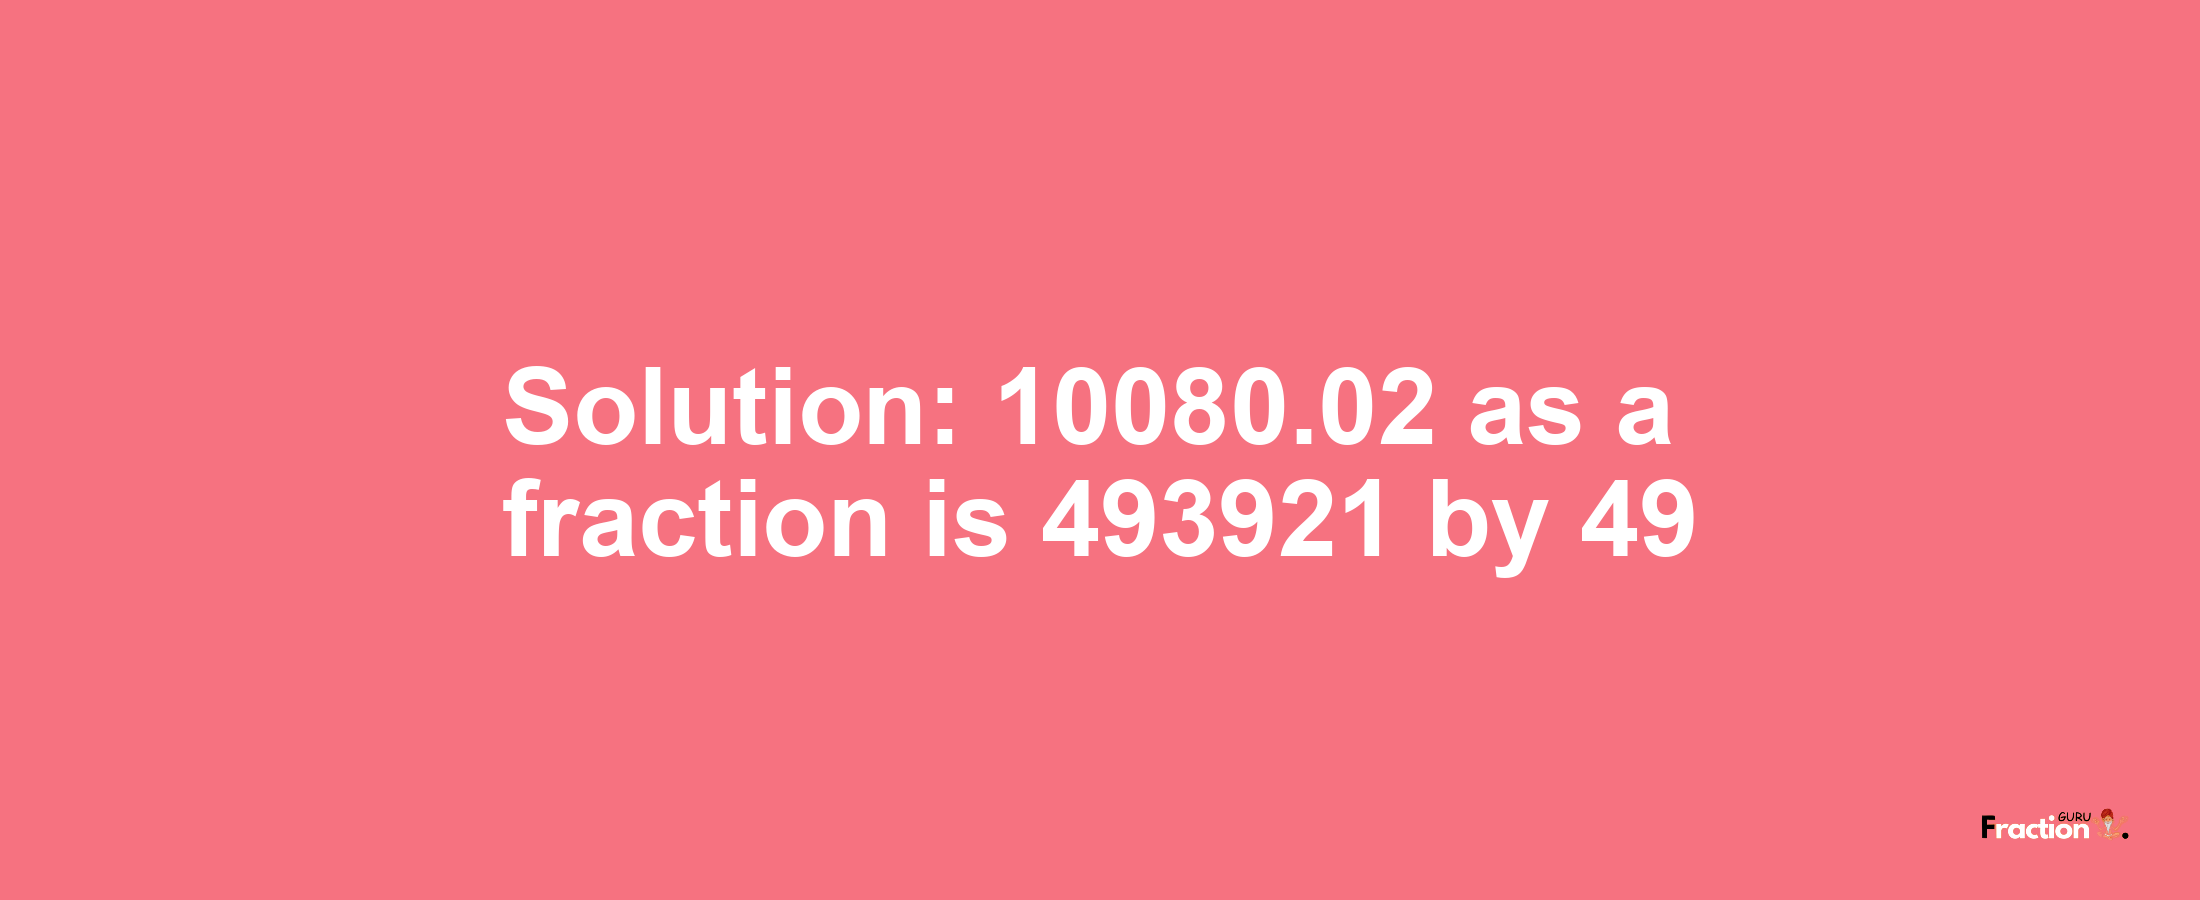 Solution:10080.02 as a fraction is 493921/49